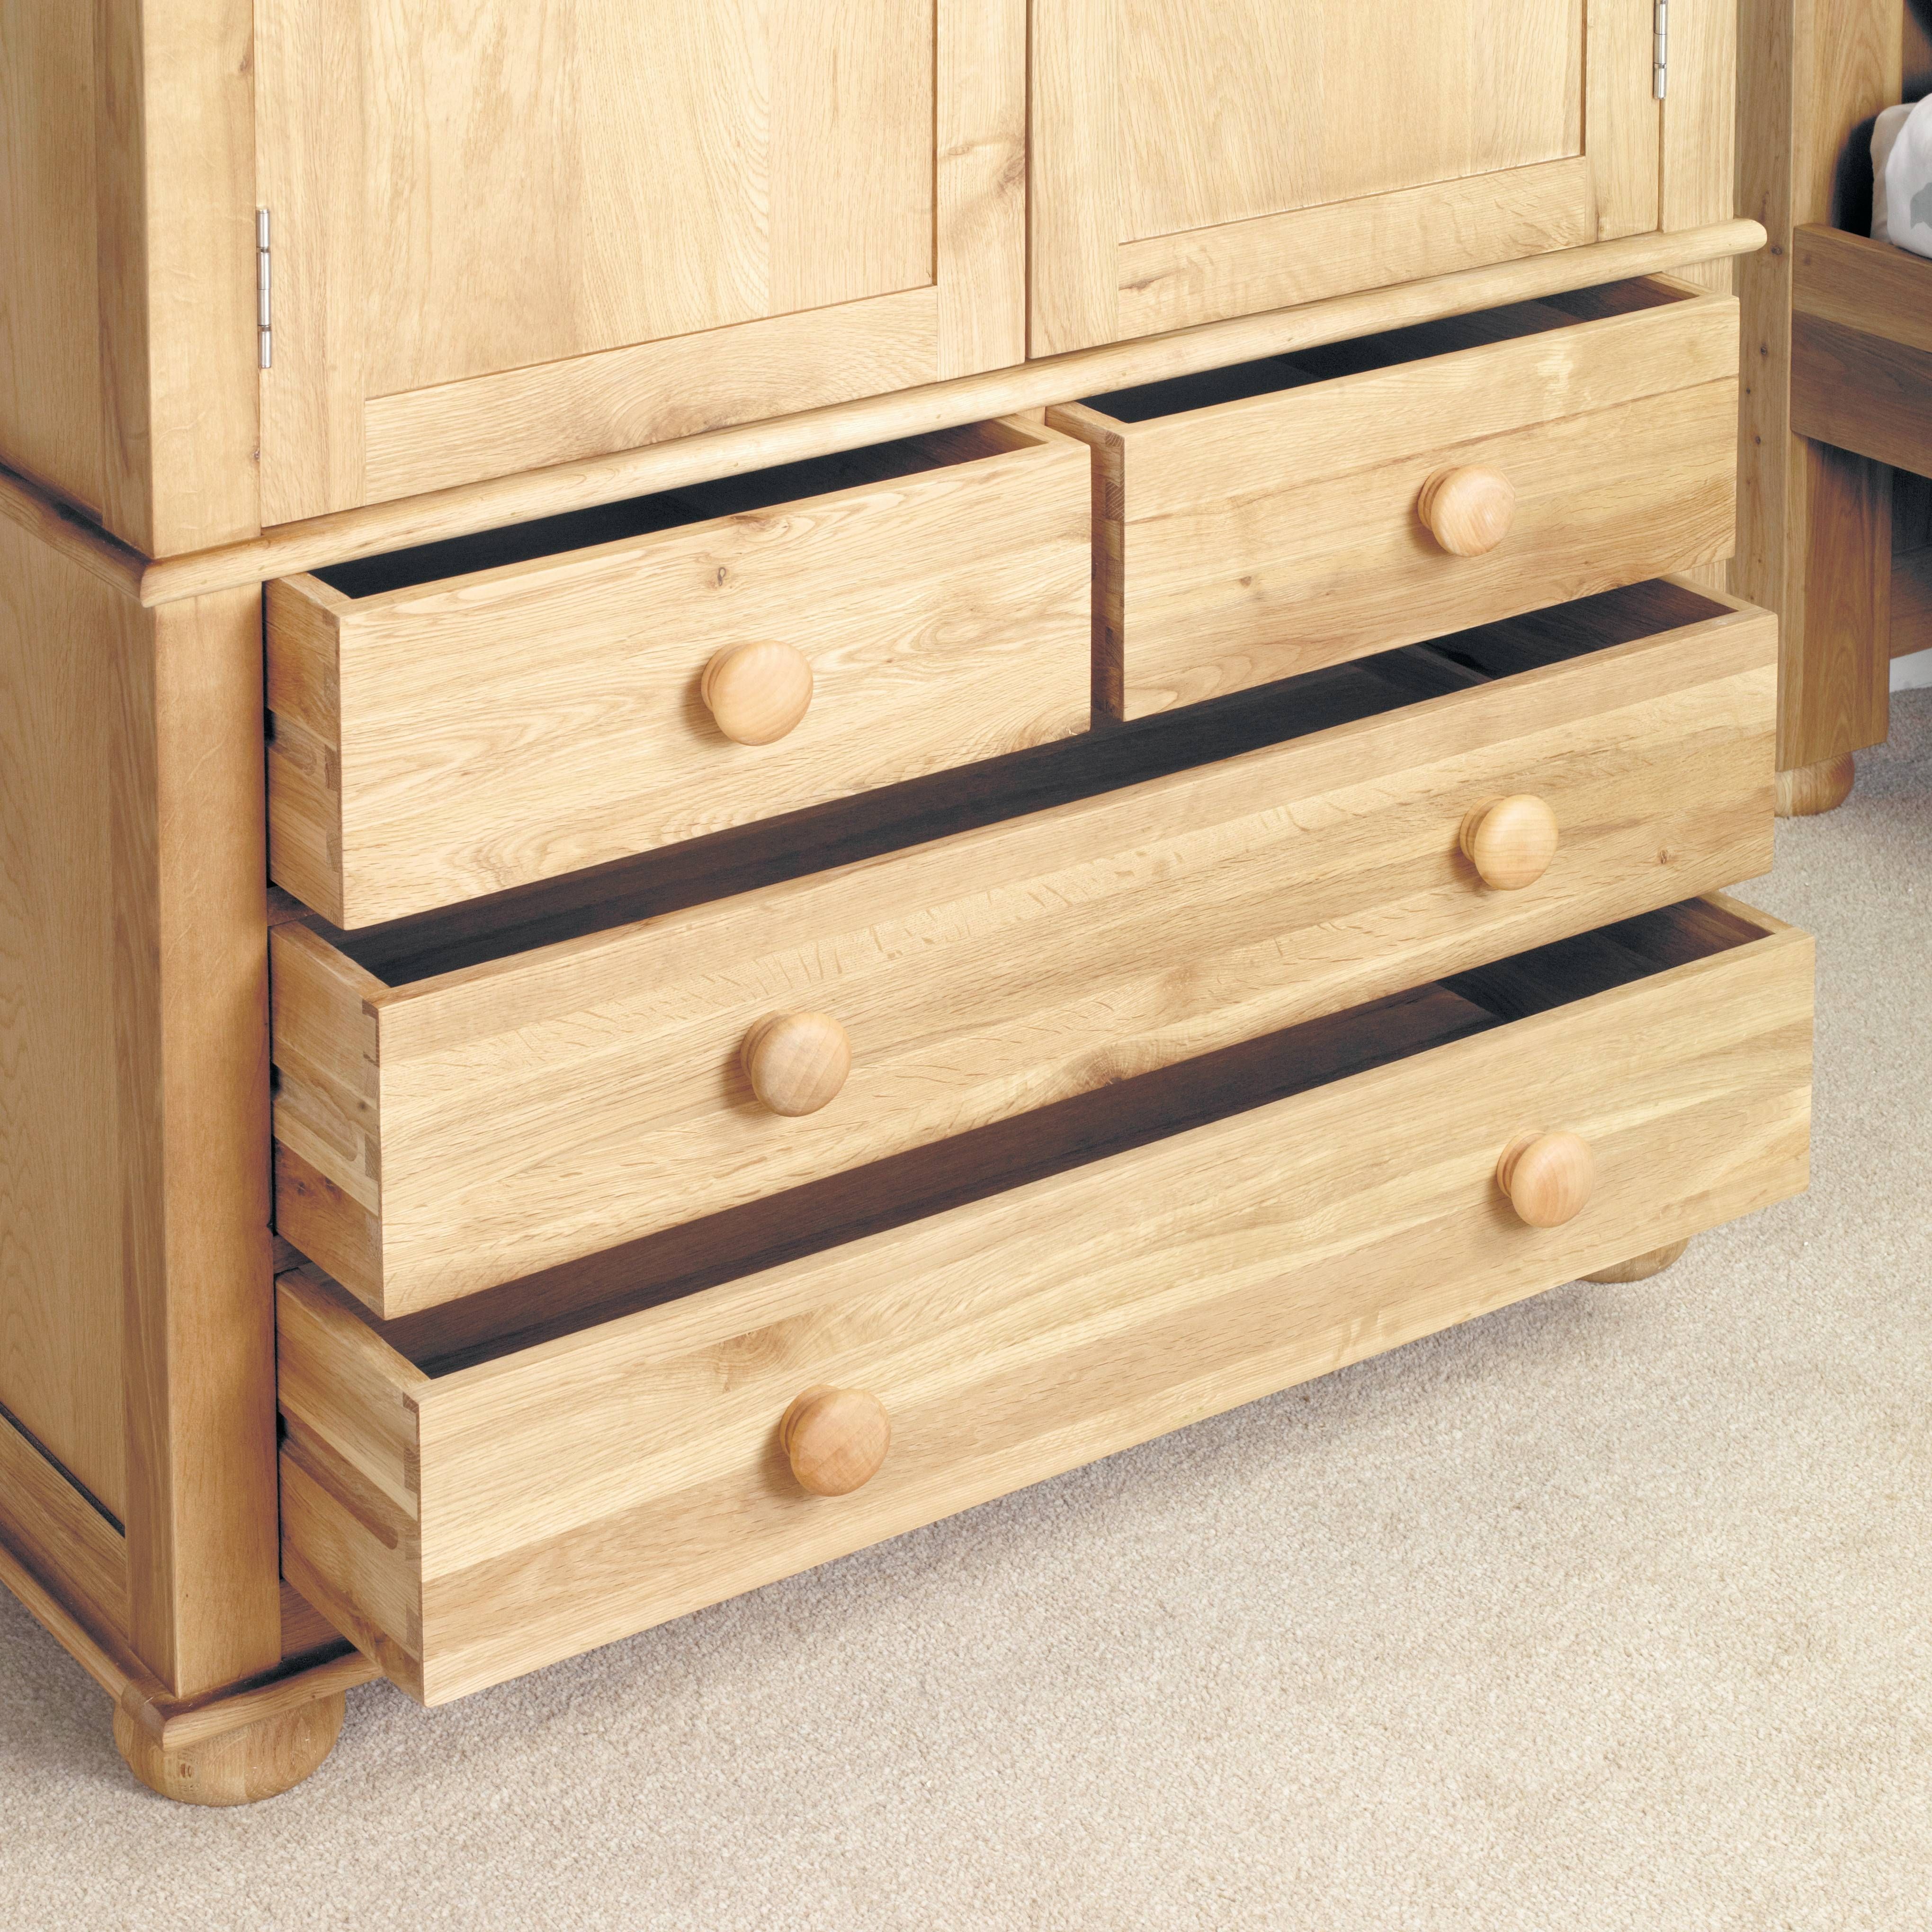 Amelie Oak Childrens Double Wardrobe | Style Our Home Throughout Childrens Double Rail Wardrobes (View 12 of 30)